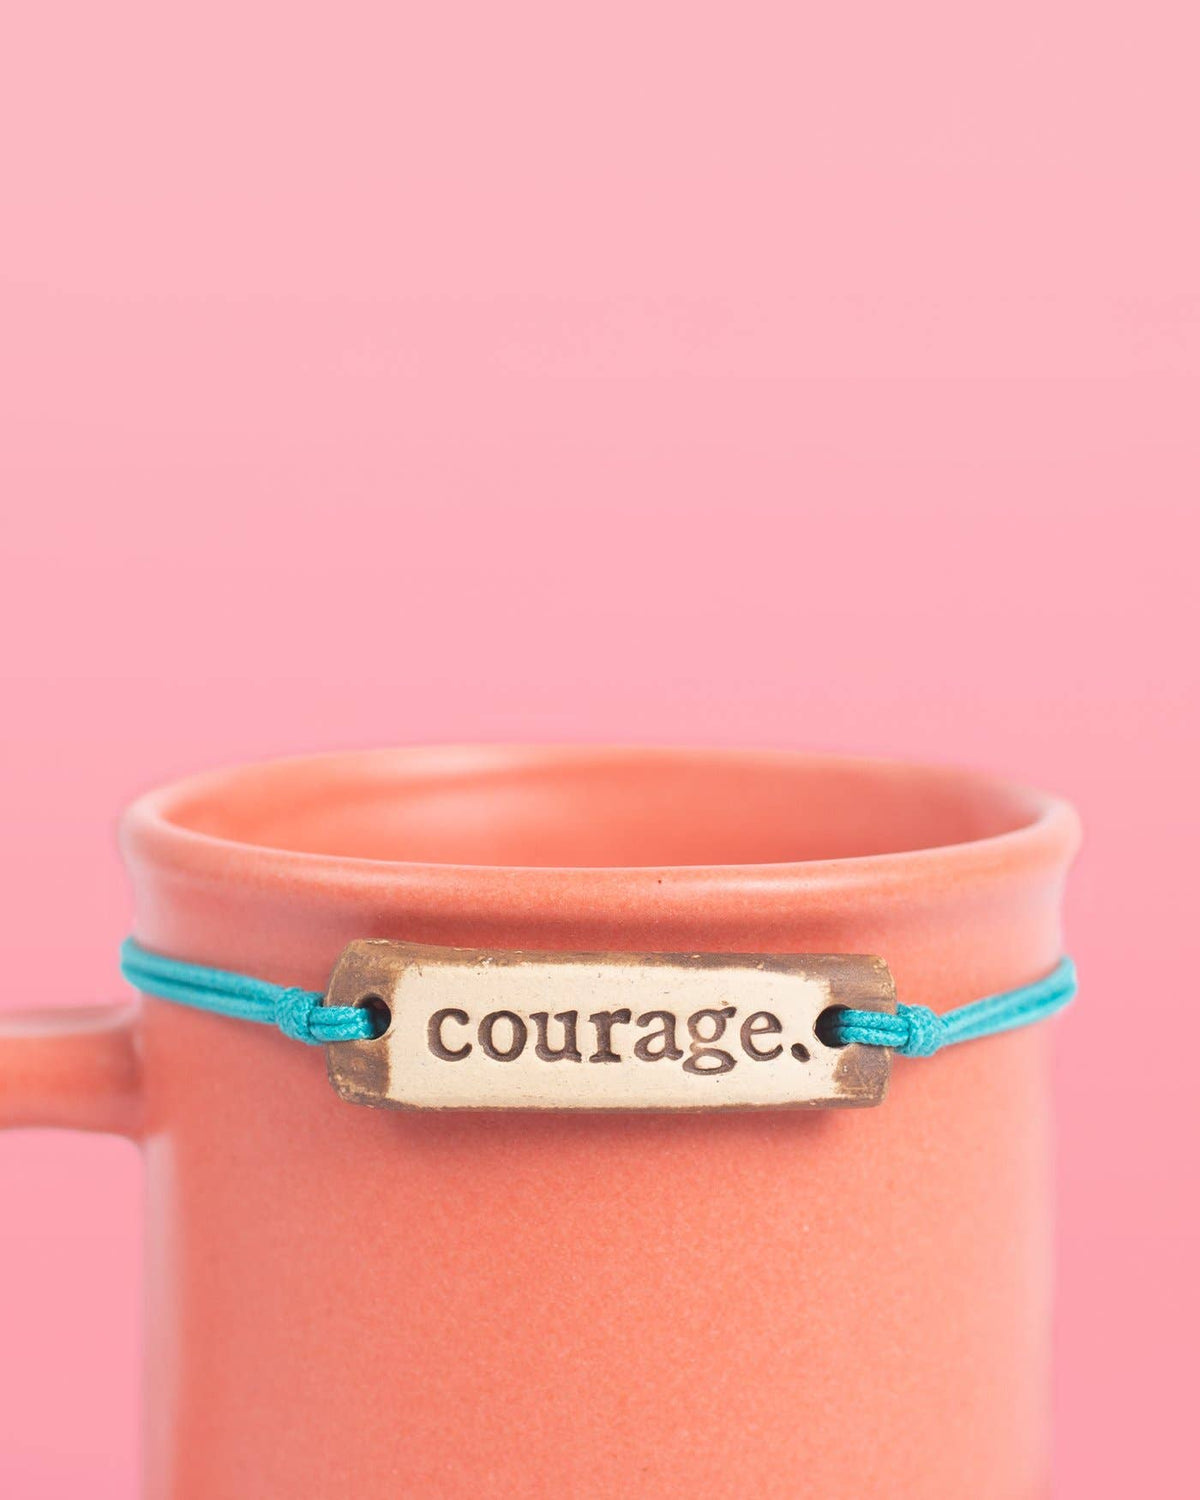 MudLOVE - courage.--Lemons and Limes Boutique